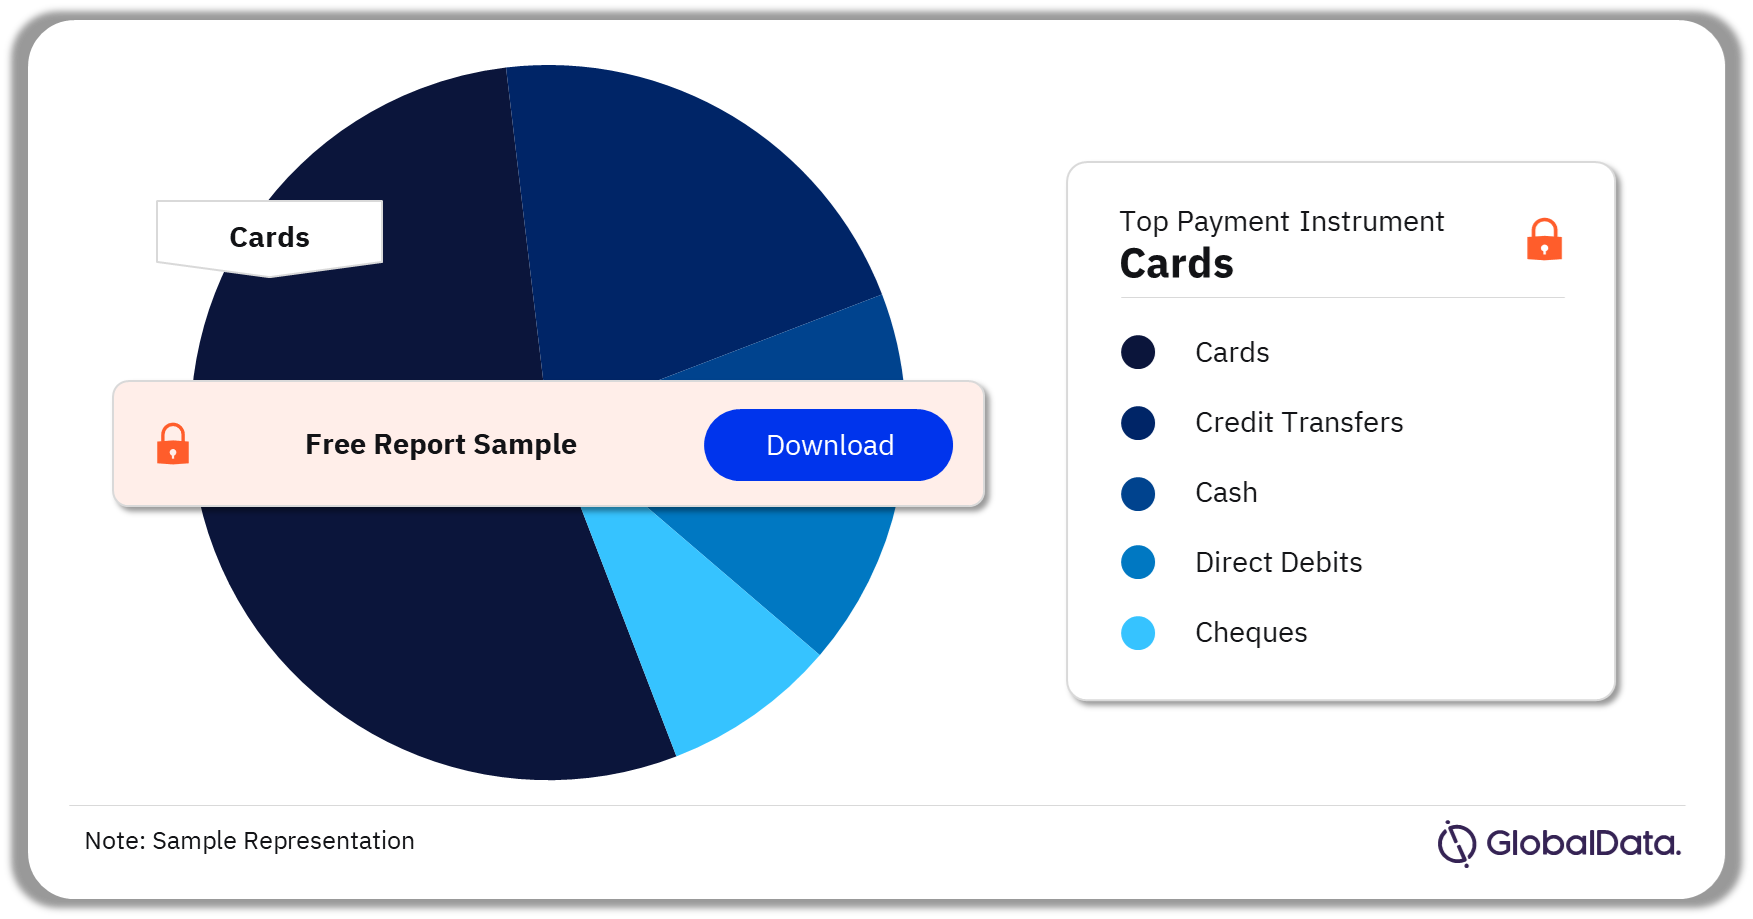 New Zealand Cards and Payments Market Analysis by Payment Instruments, 2023 (%)